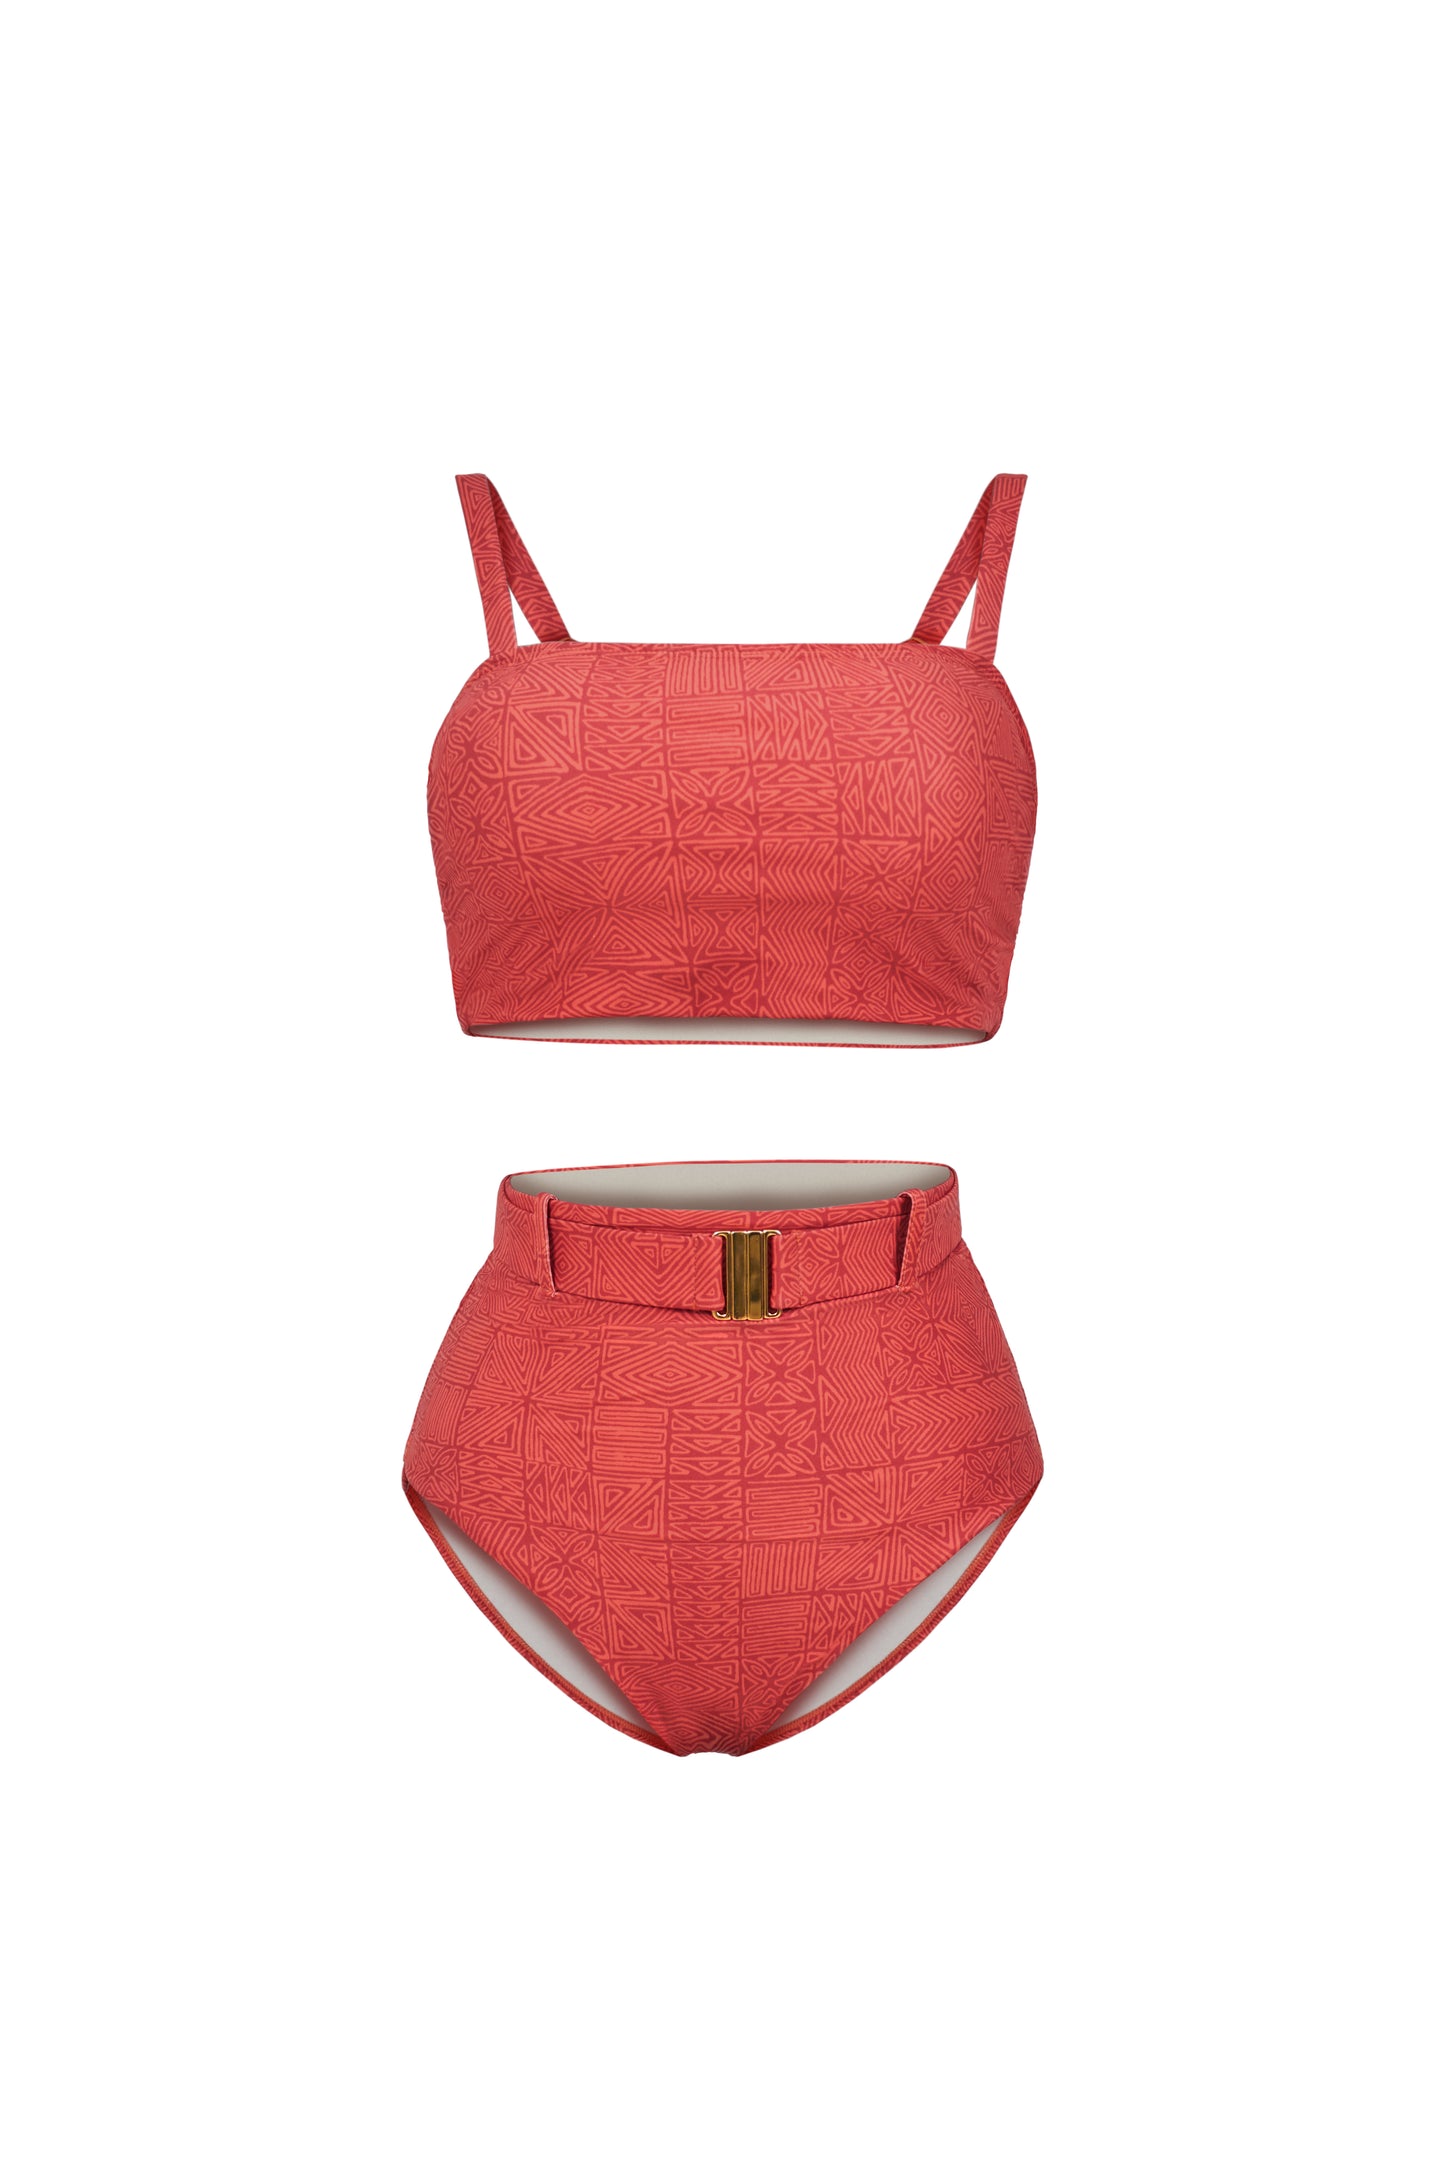 Full Coverage Two Piece Bathing Suit